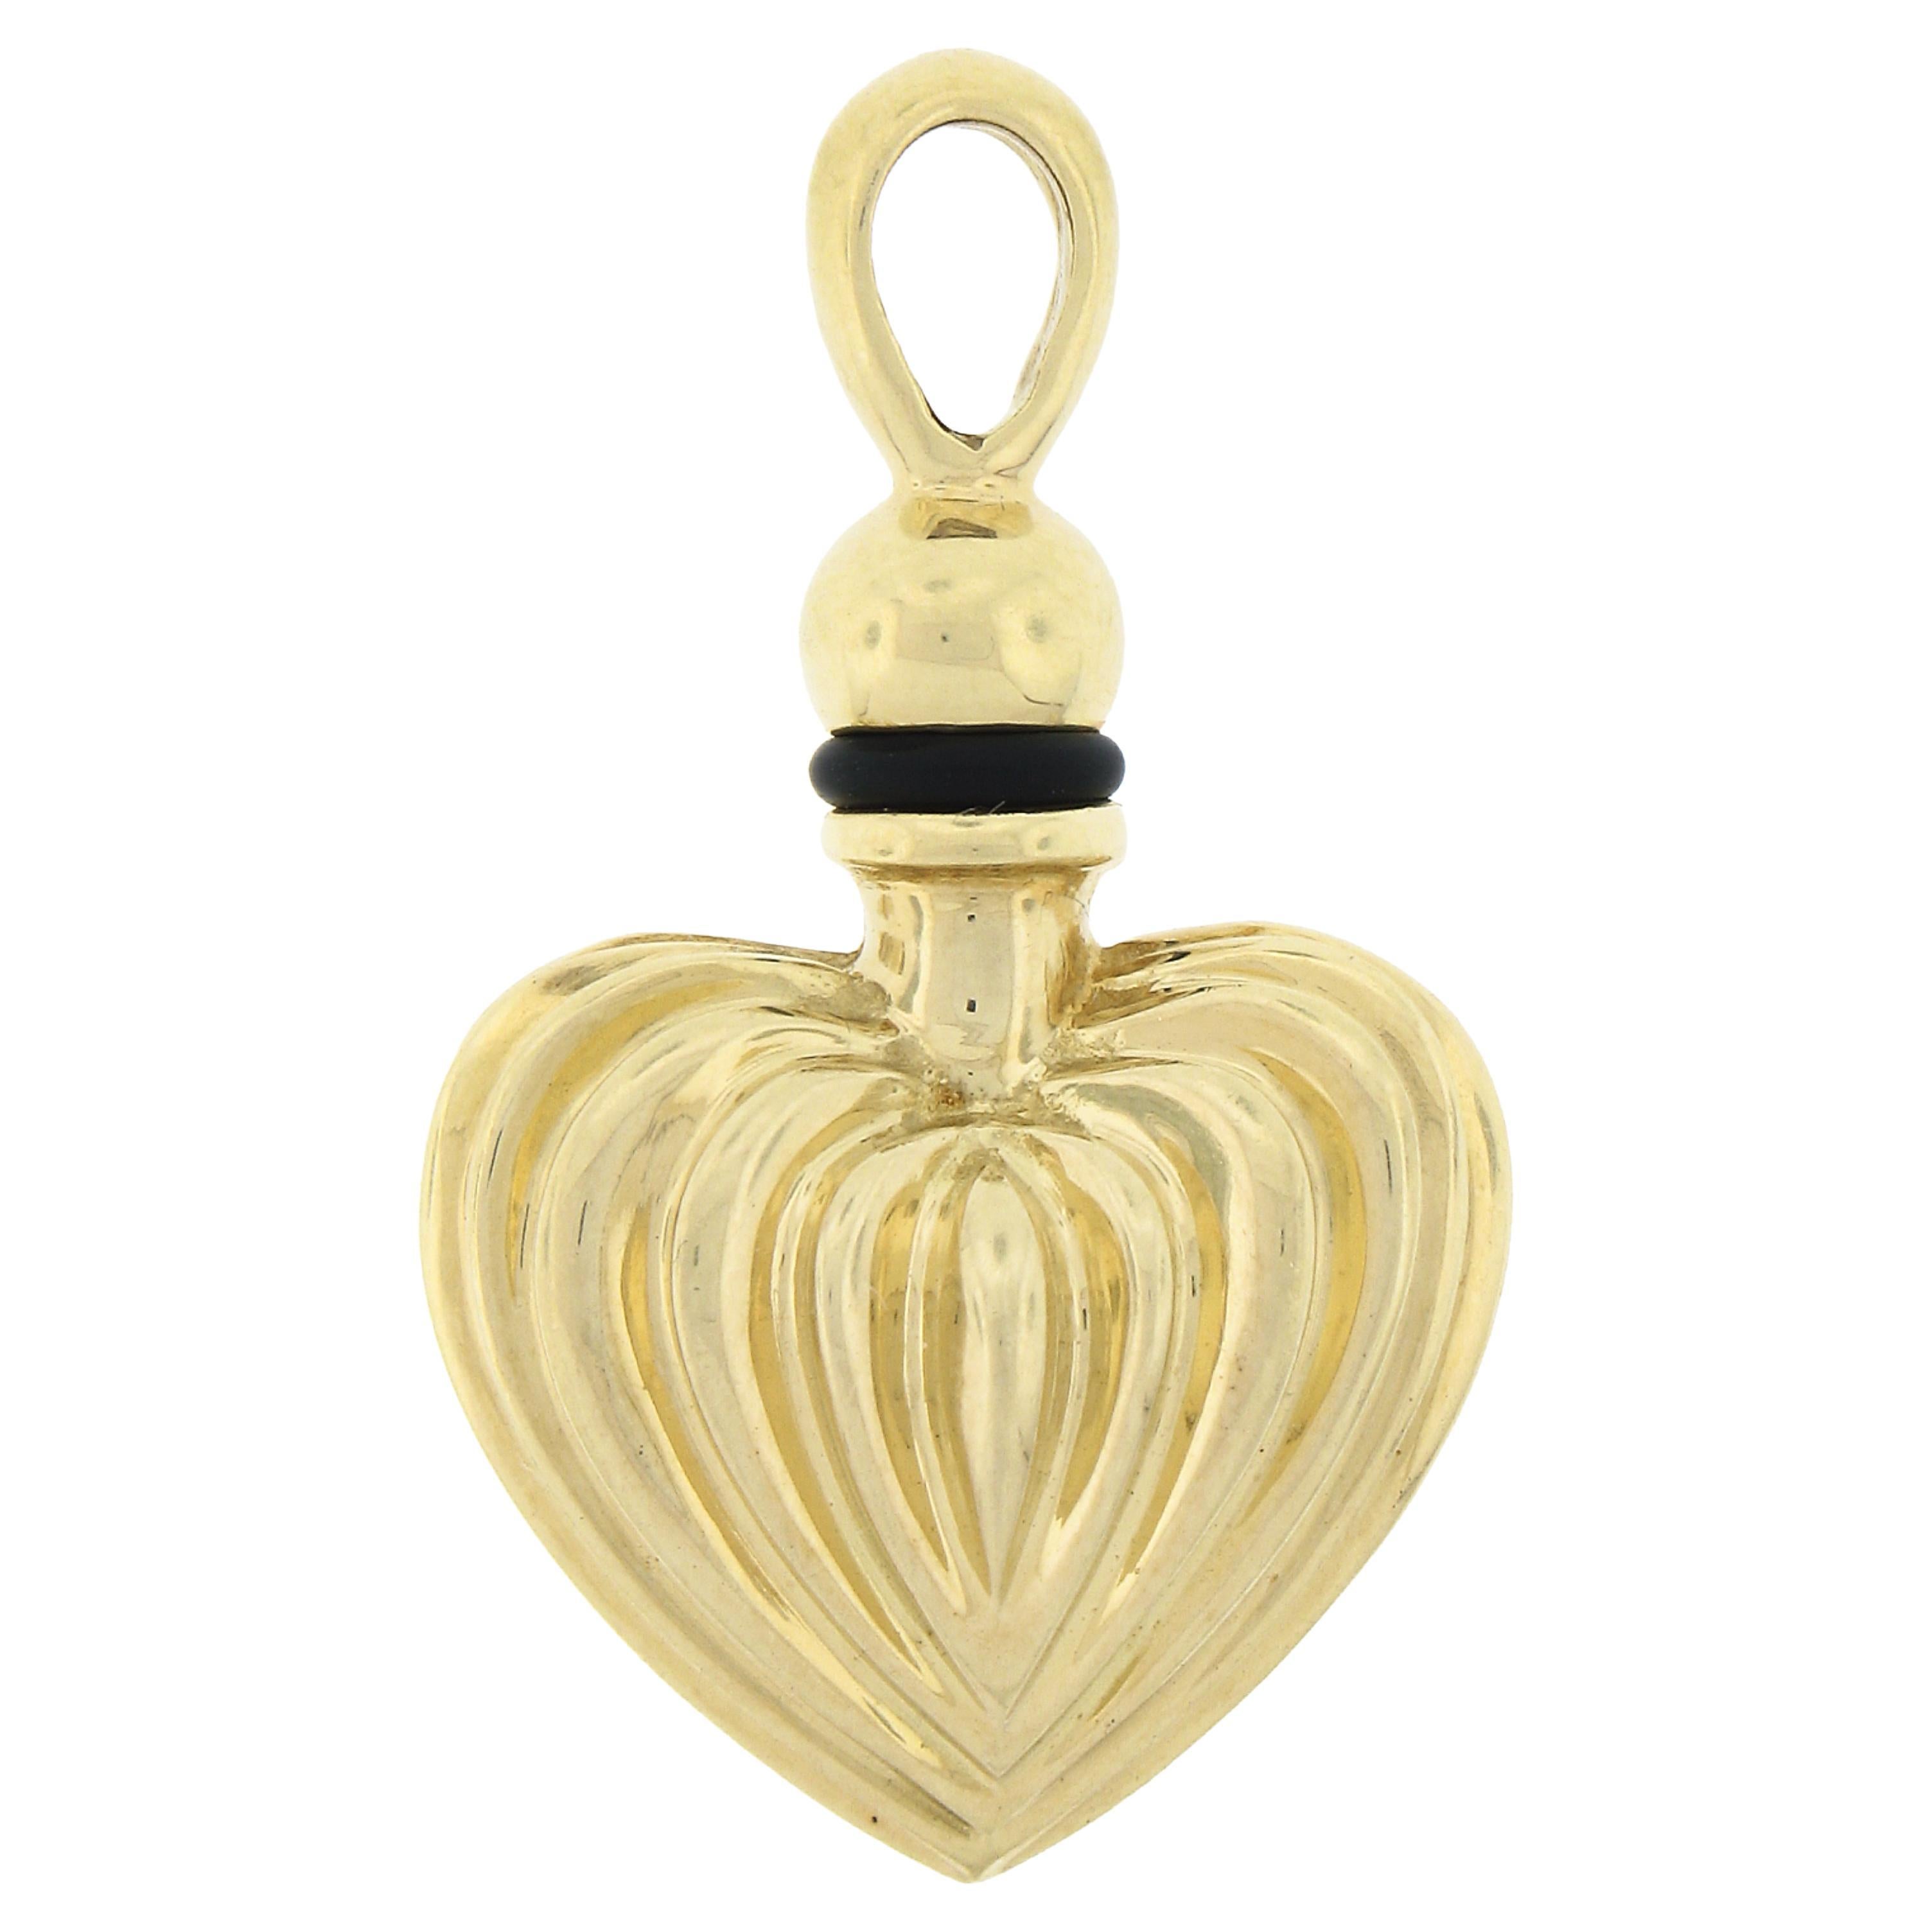 Lagos 18k Yellow Gold Fluted Puffed Heart Perfume Flask Bottle Charm Pendant